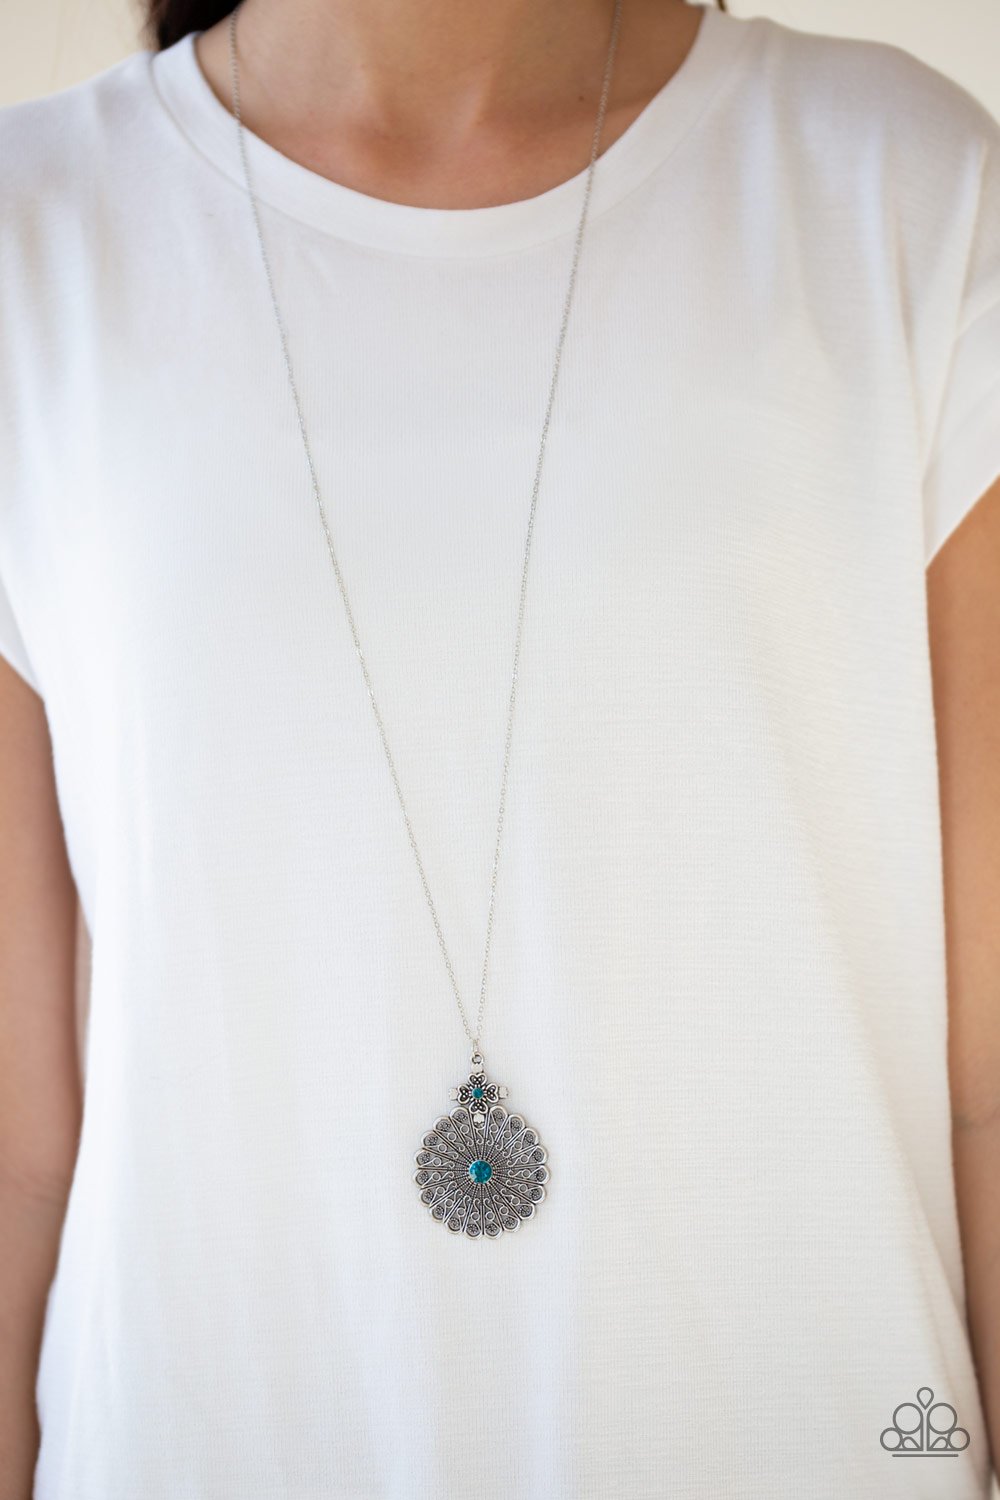 Walk On the WILDFLOWER Side-blue-Paparazzi necklace